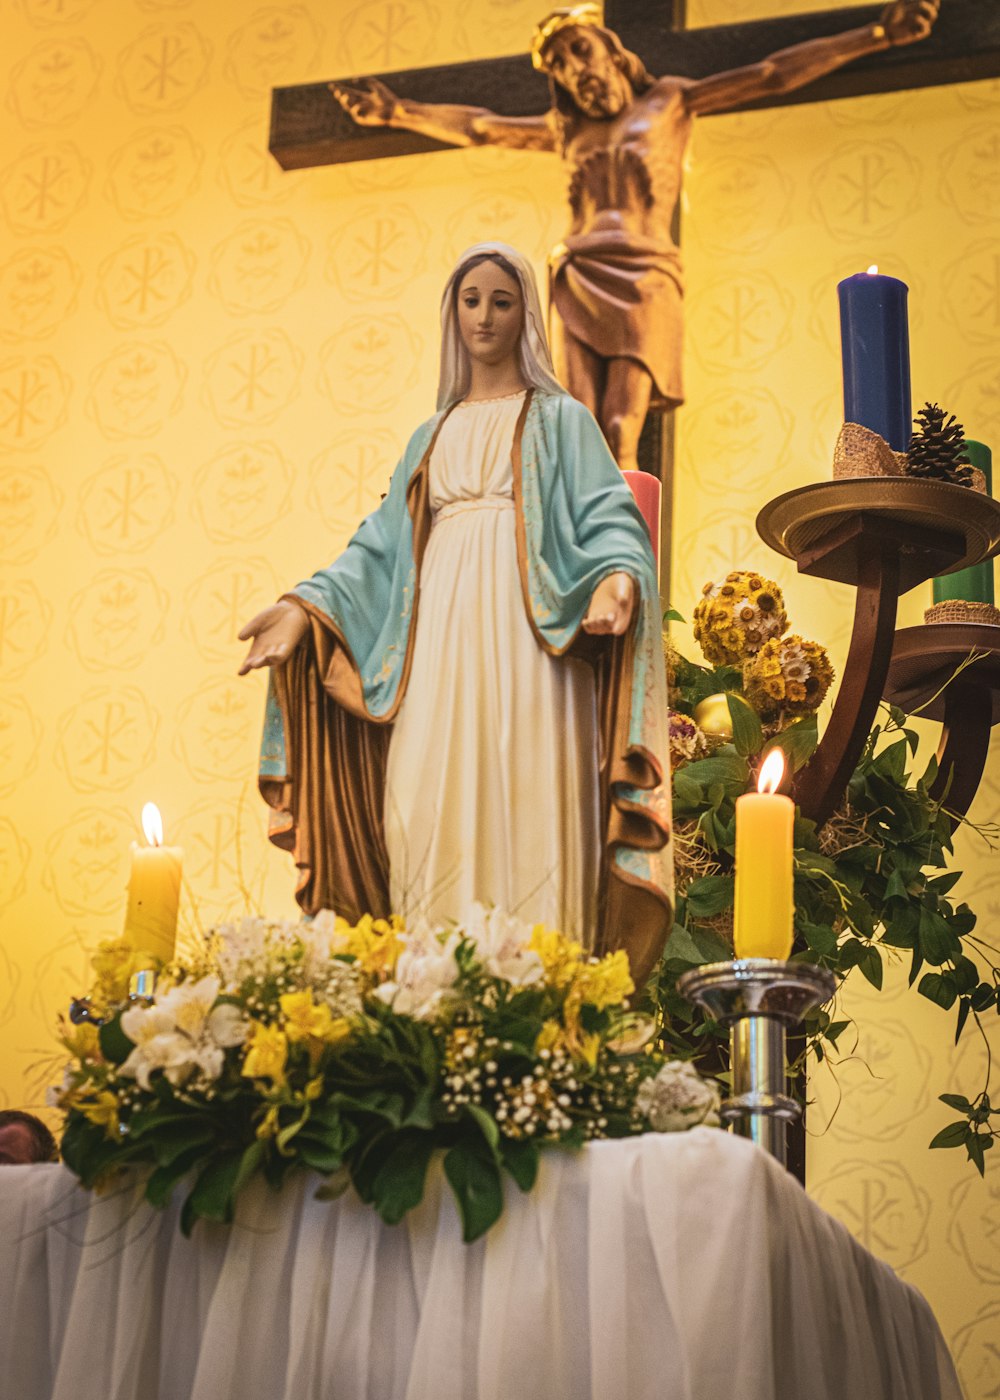 500+ Virgin Mary Pictures [HD] | Download Free Images on Unsplash